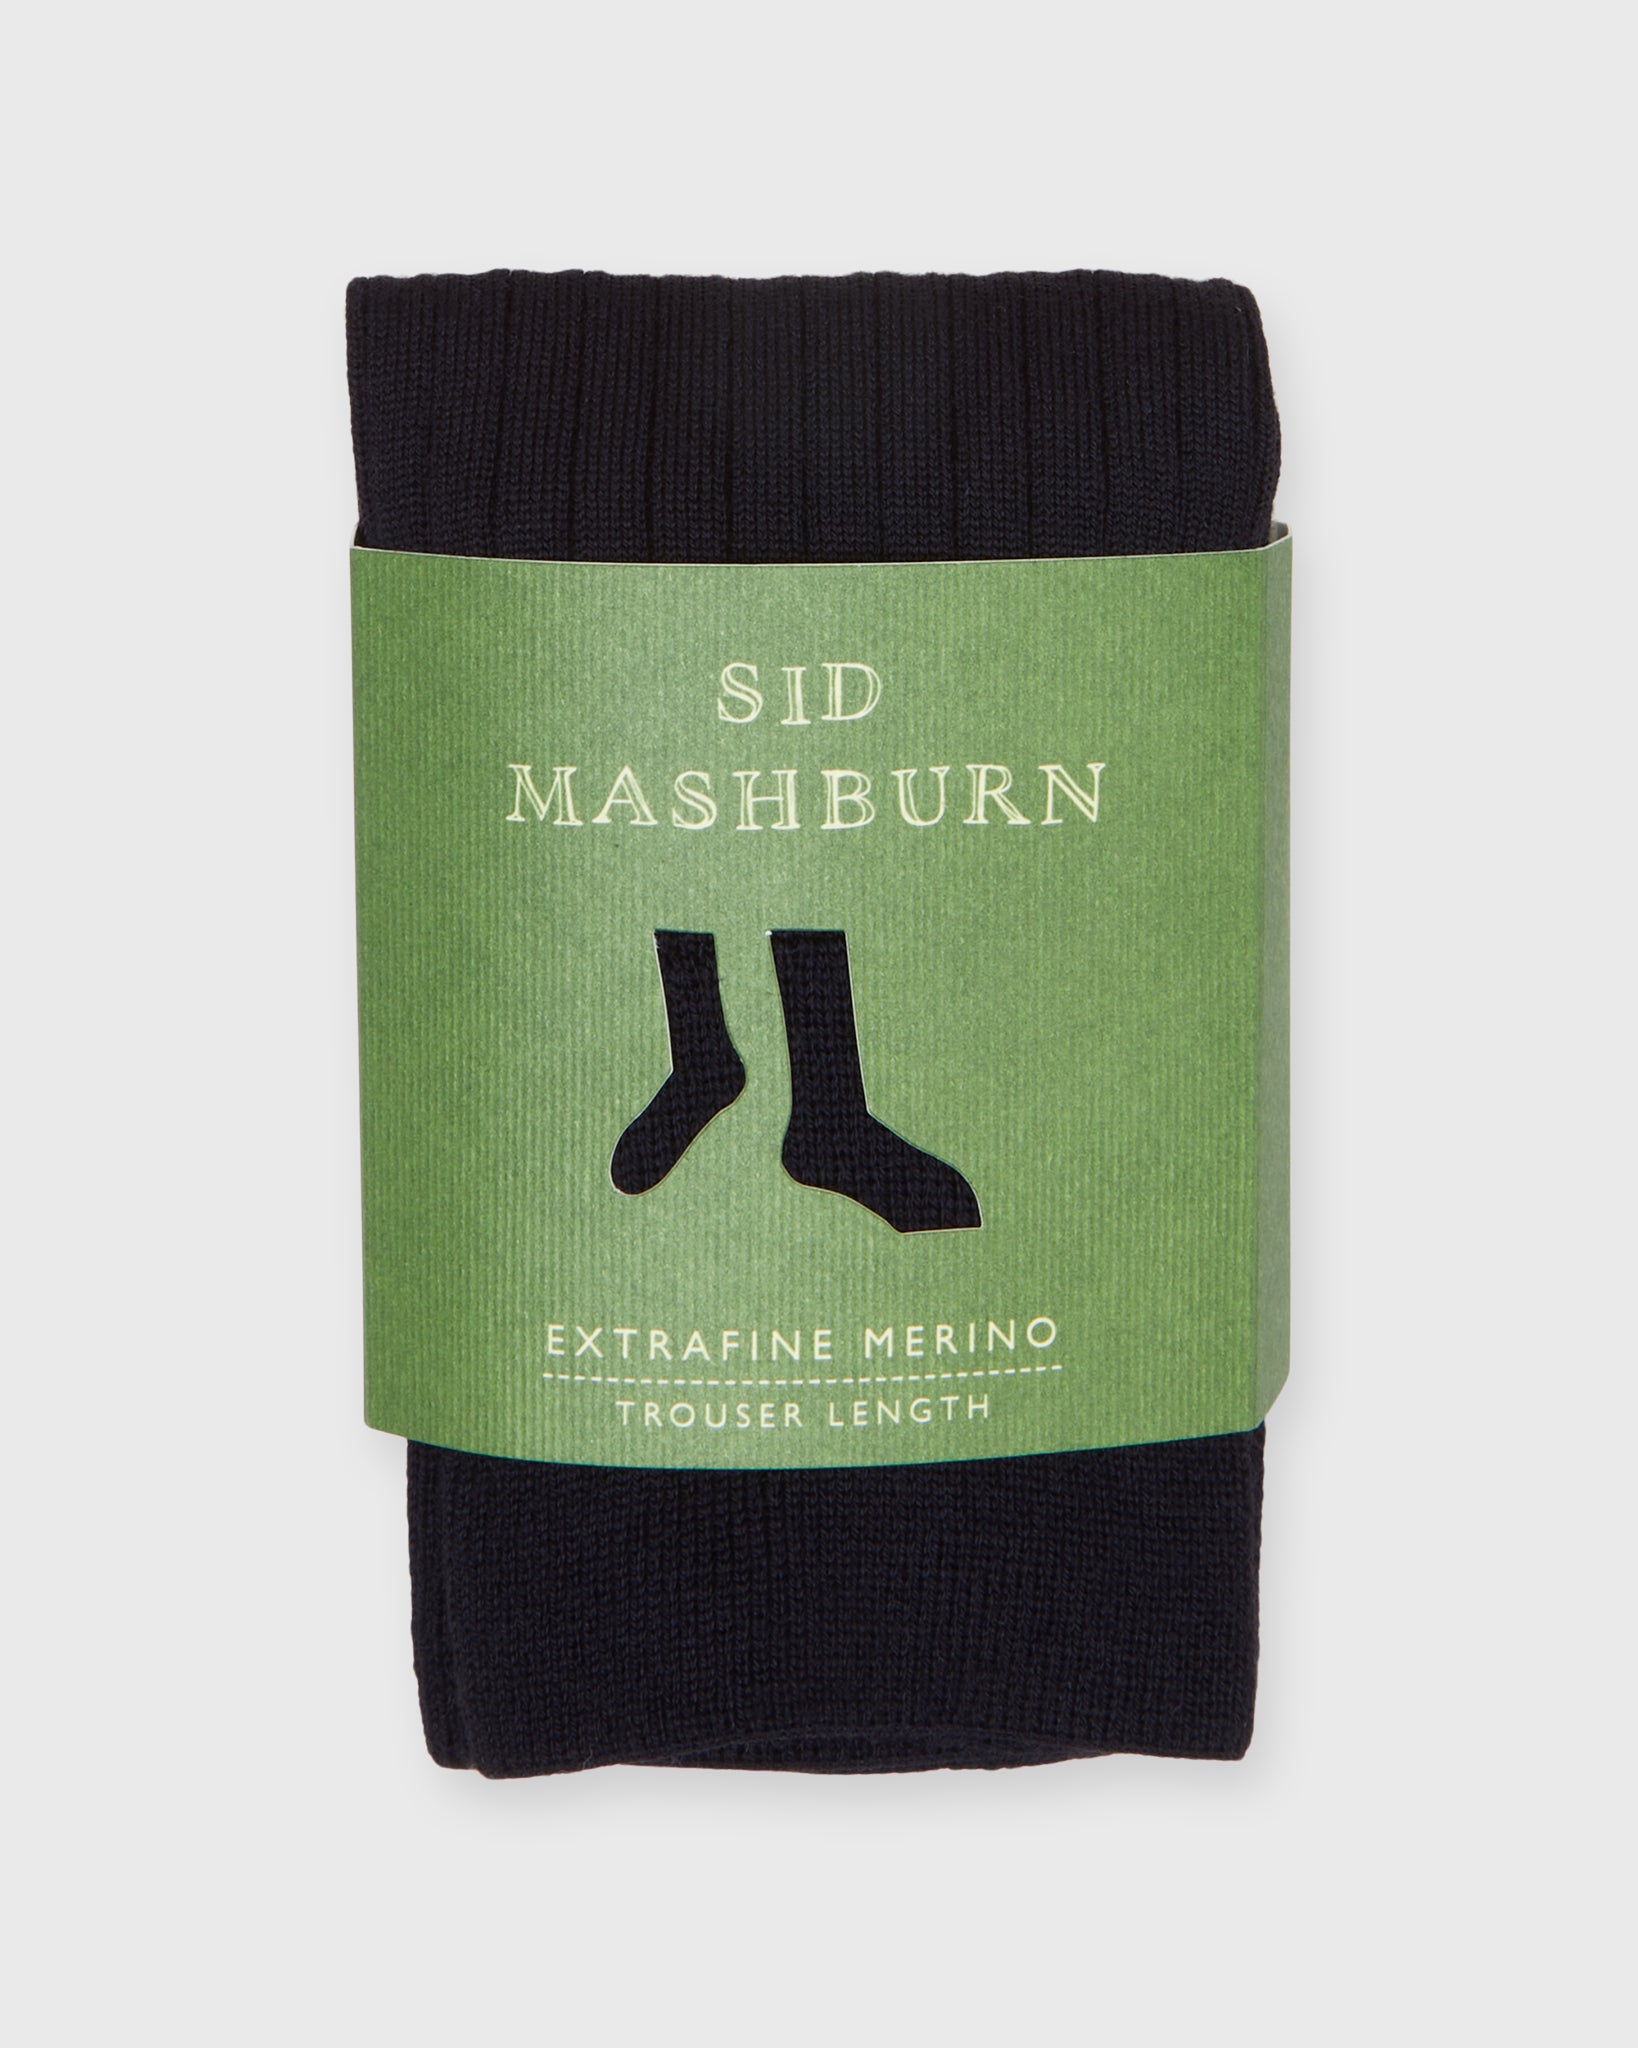 Cashmere Socks | Quince